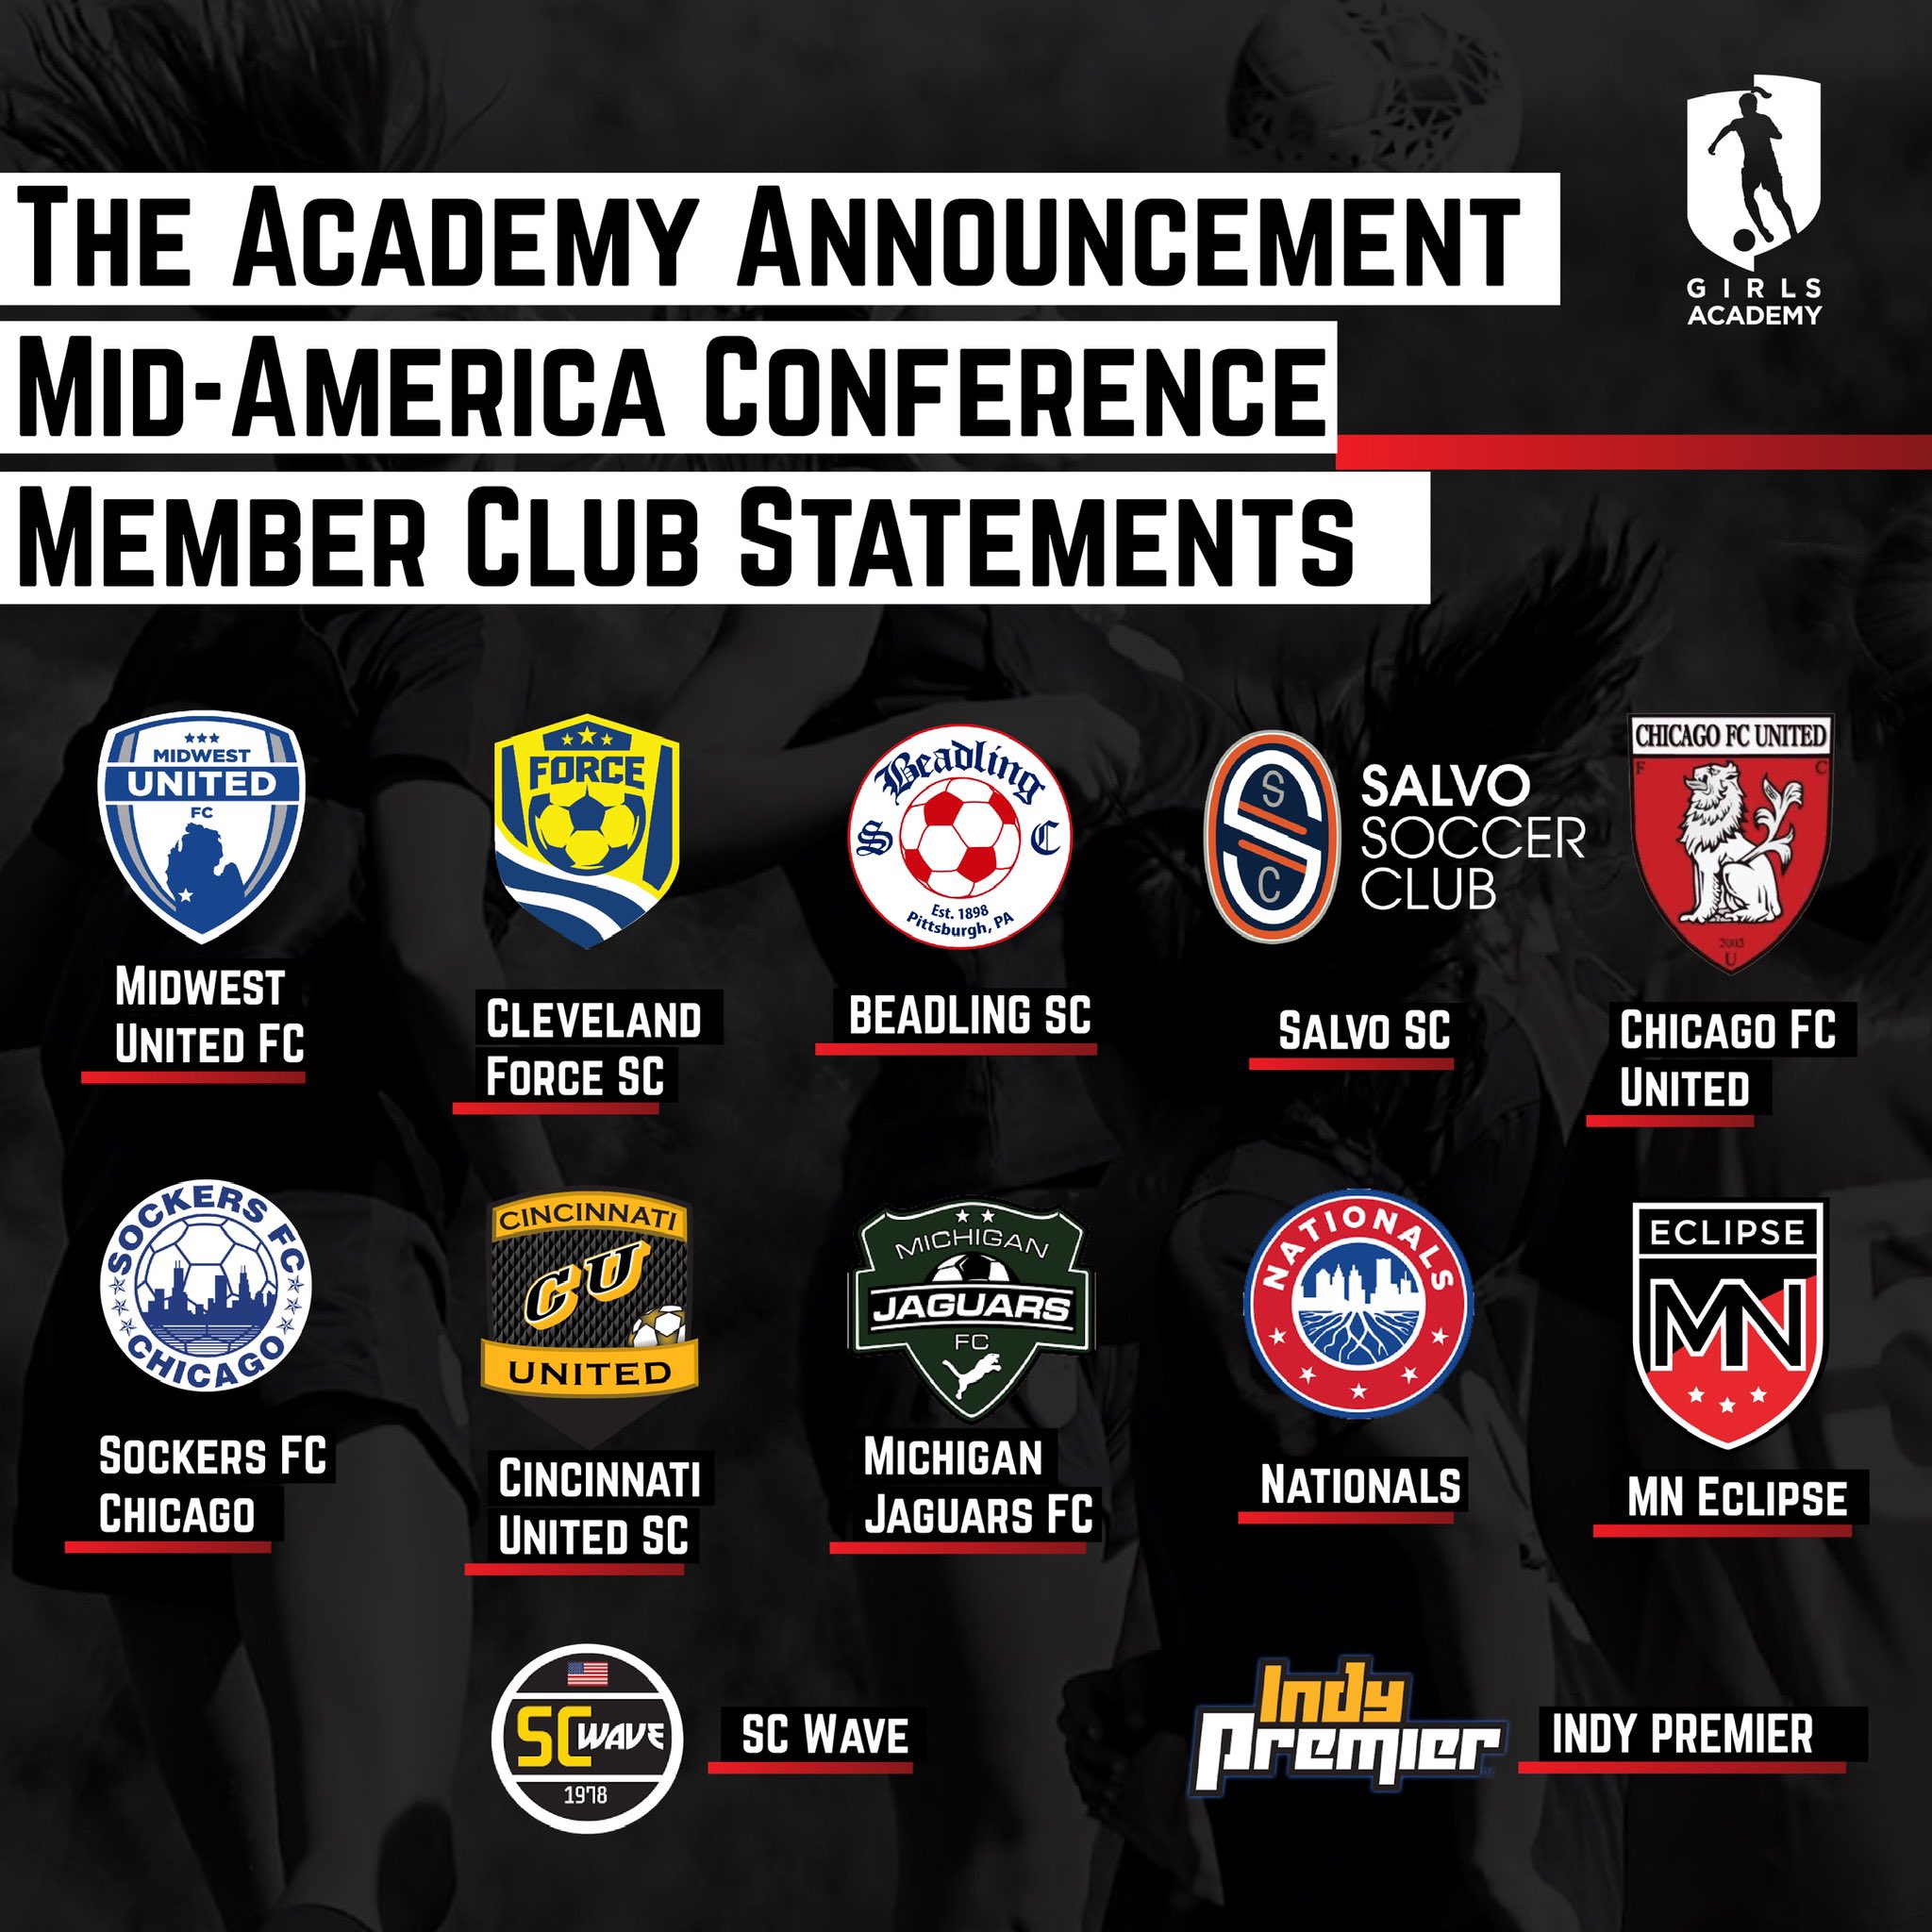 Girls Academy League Unveils Initial Conference Alignment First Wave Of Clubs - Soccerwire